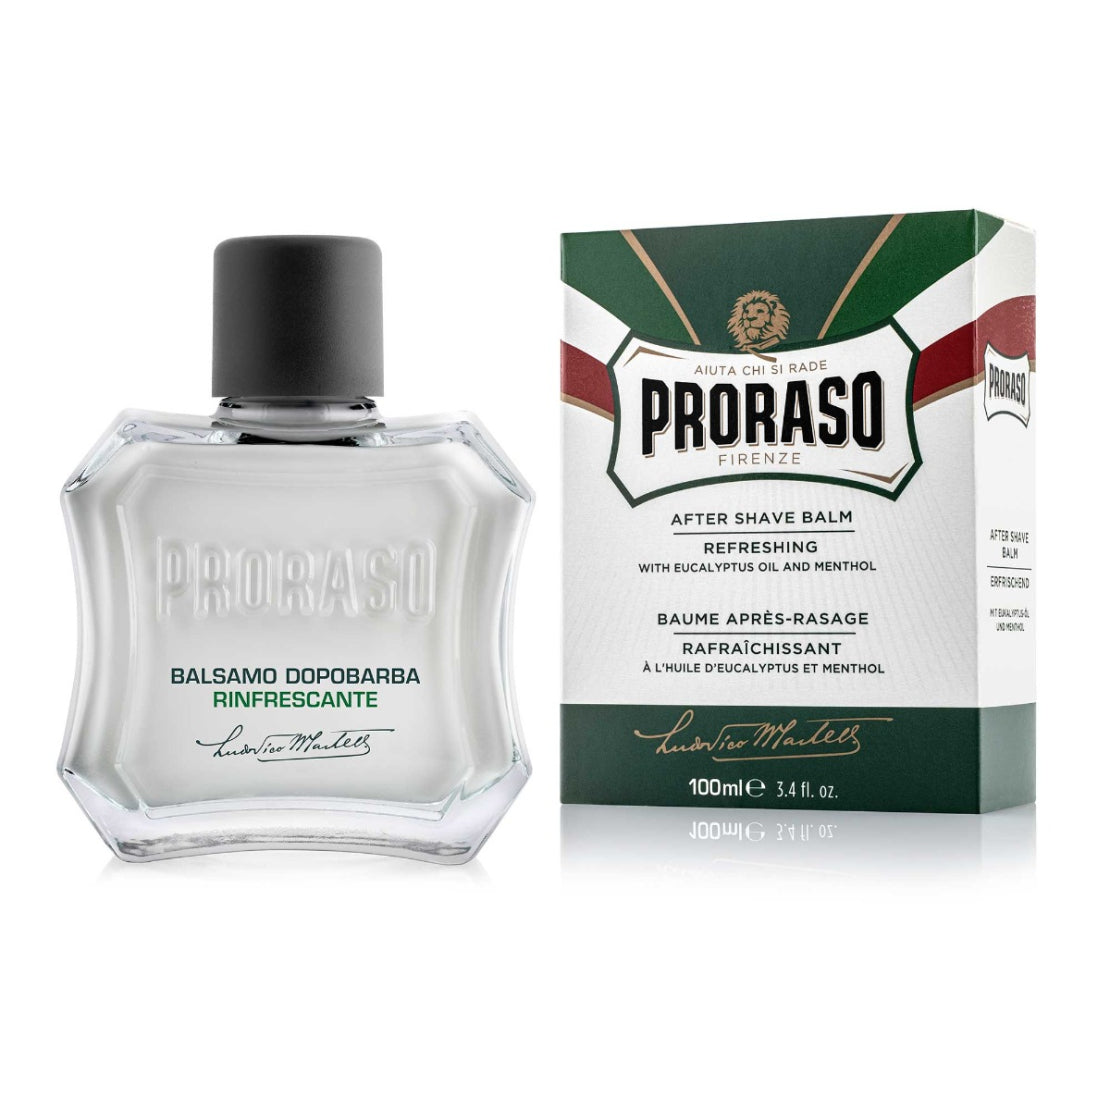 PRORASO After Shave Balm - Refreshing Formula